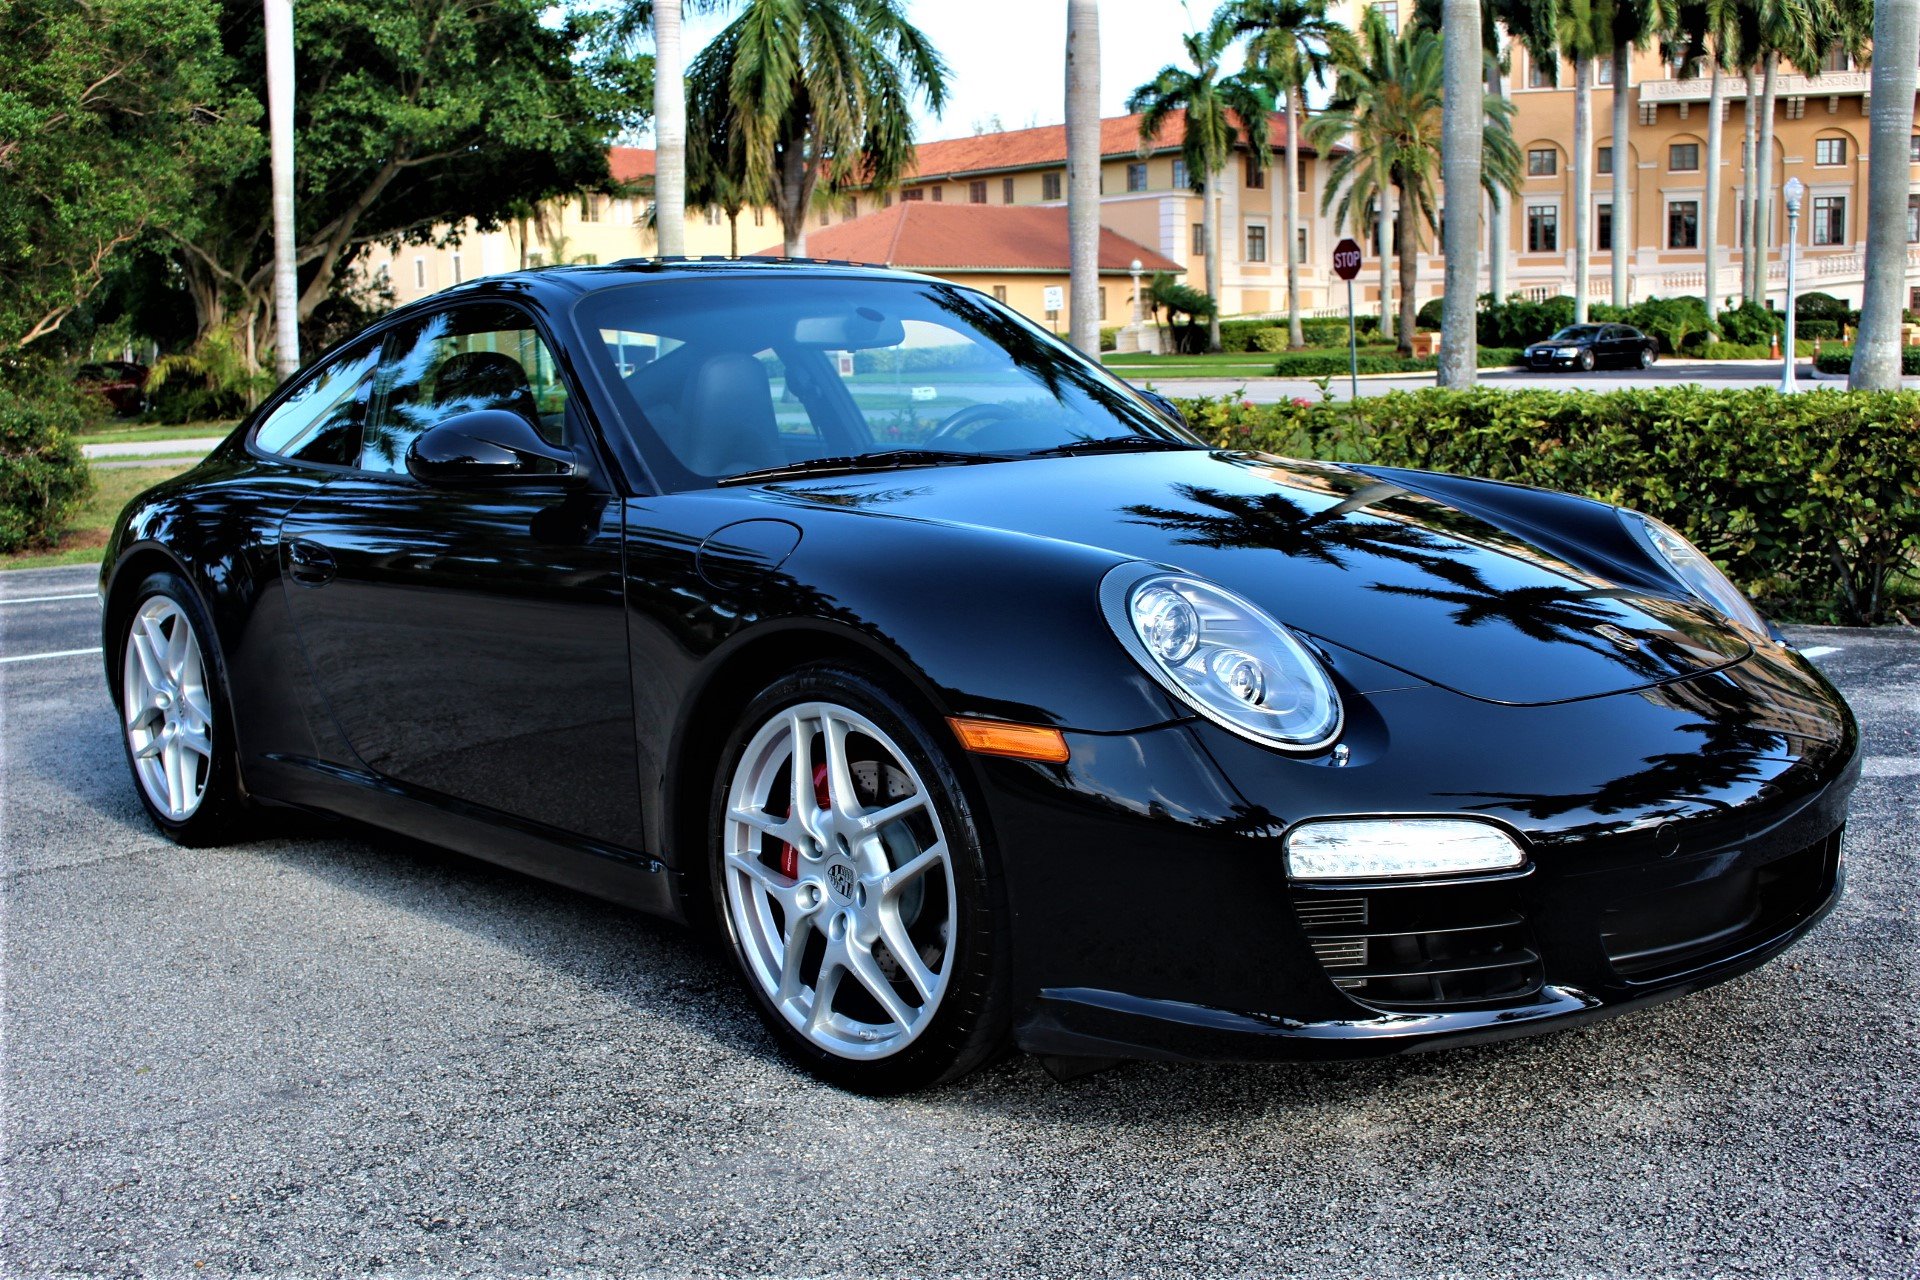 Used 2010 Porsche 911 Carrera S for sale Sold at The Gables Sports Cars in Miami FL 33146 4